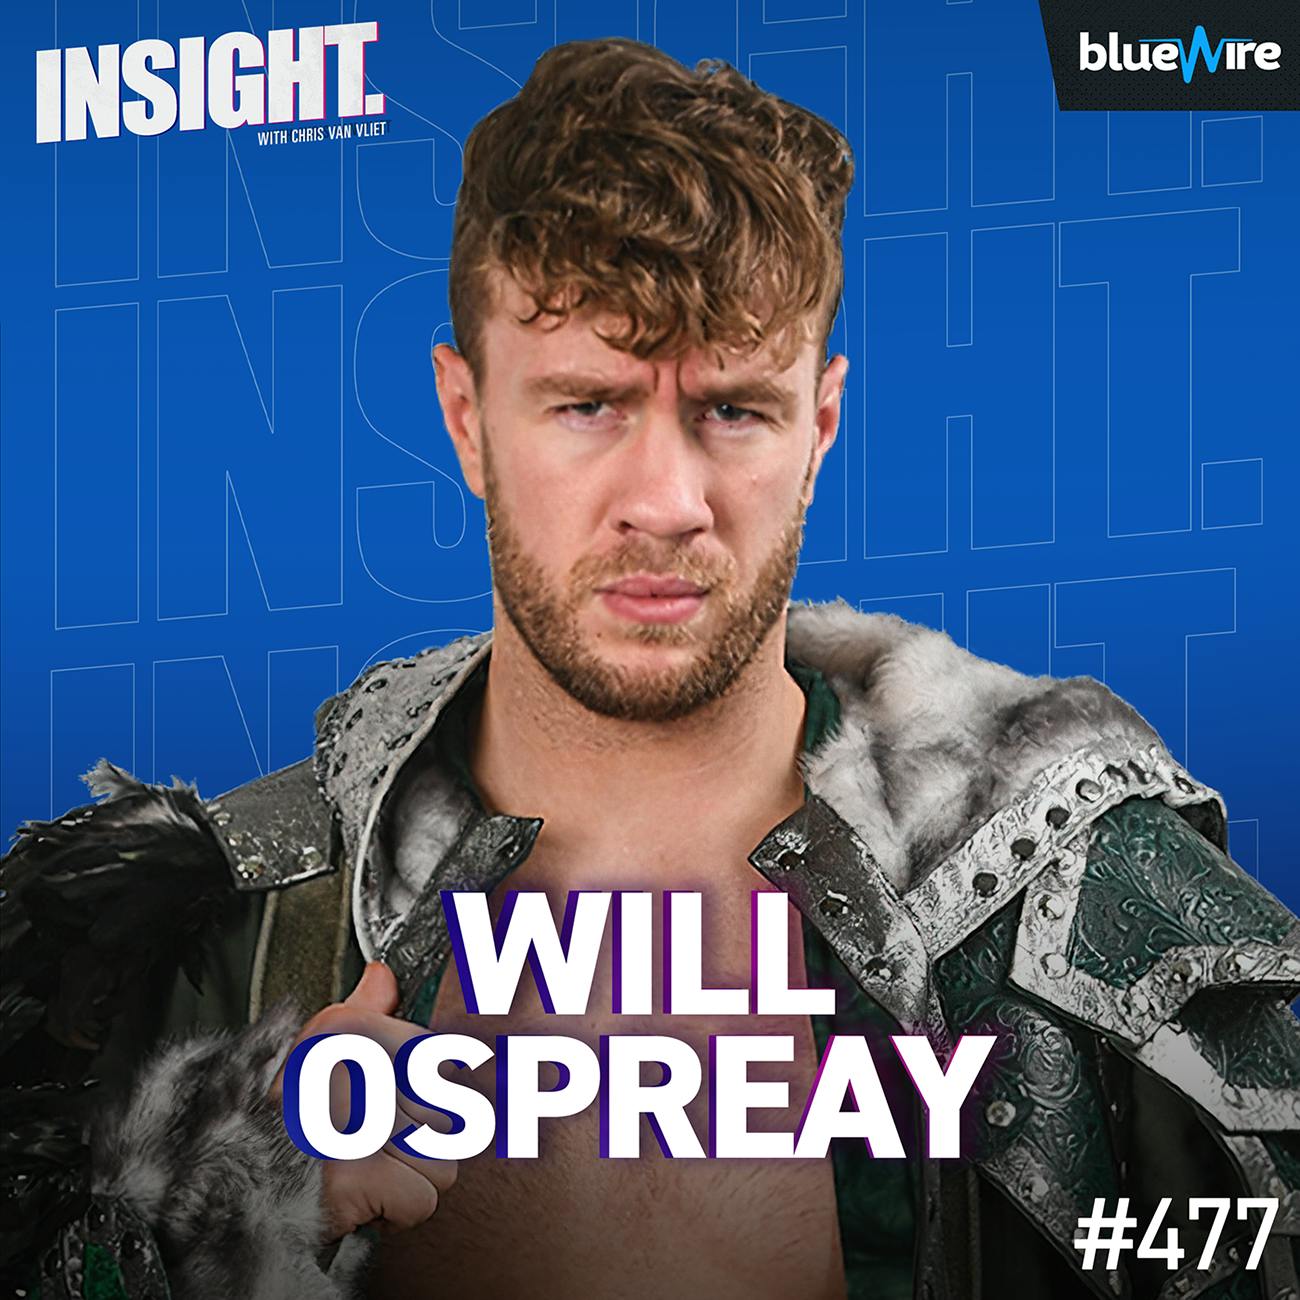 Will Ospreay Has 25 5-Star Matches! NJPW Contract Ends Next Year, AEW, Kenny Omega Match